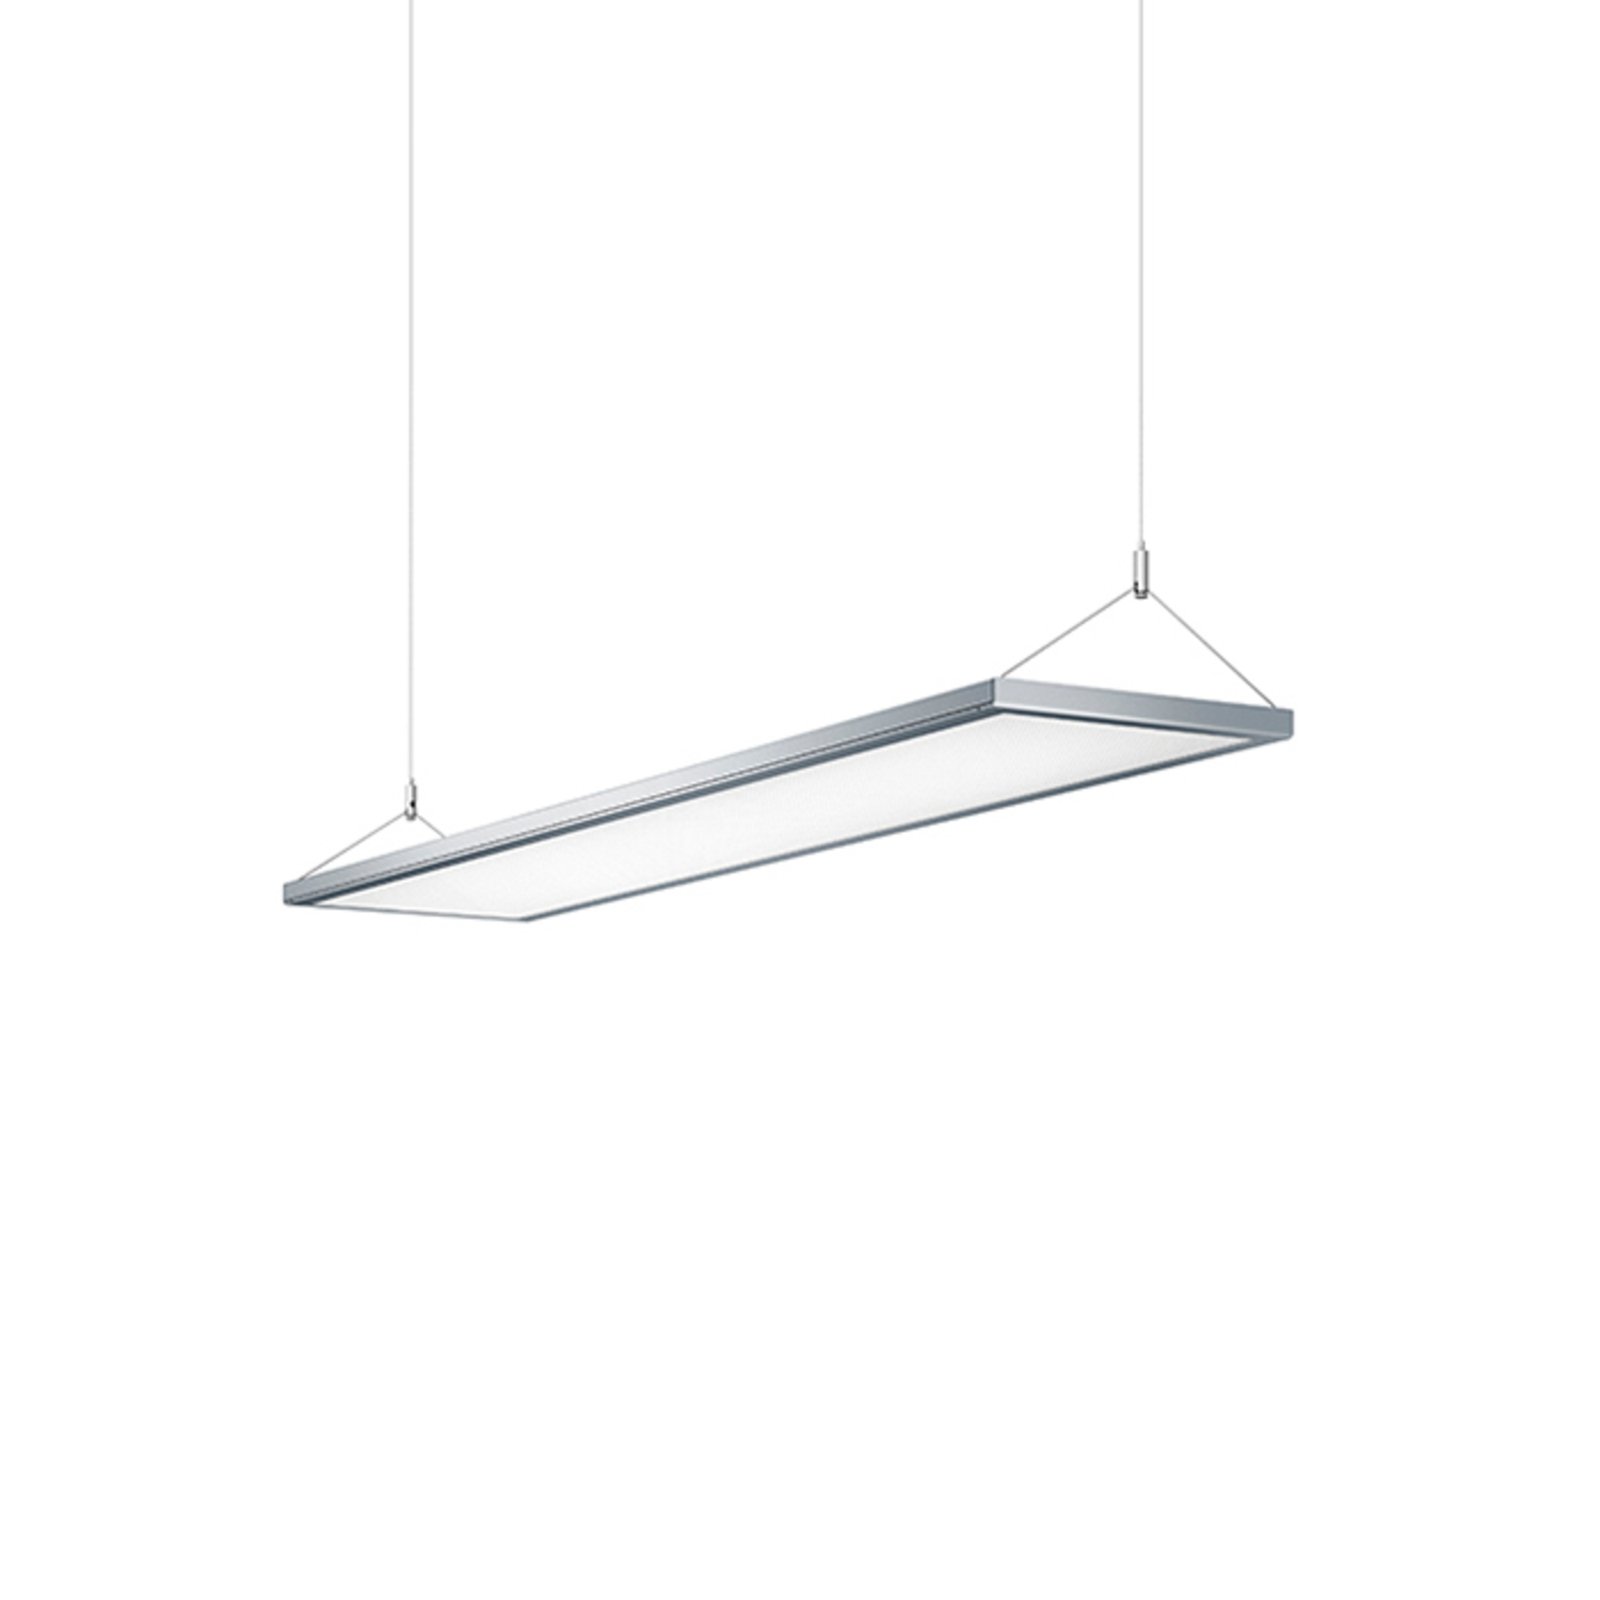 IDOO LED hanging light for offices 49 W, silver